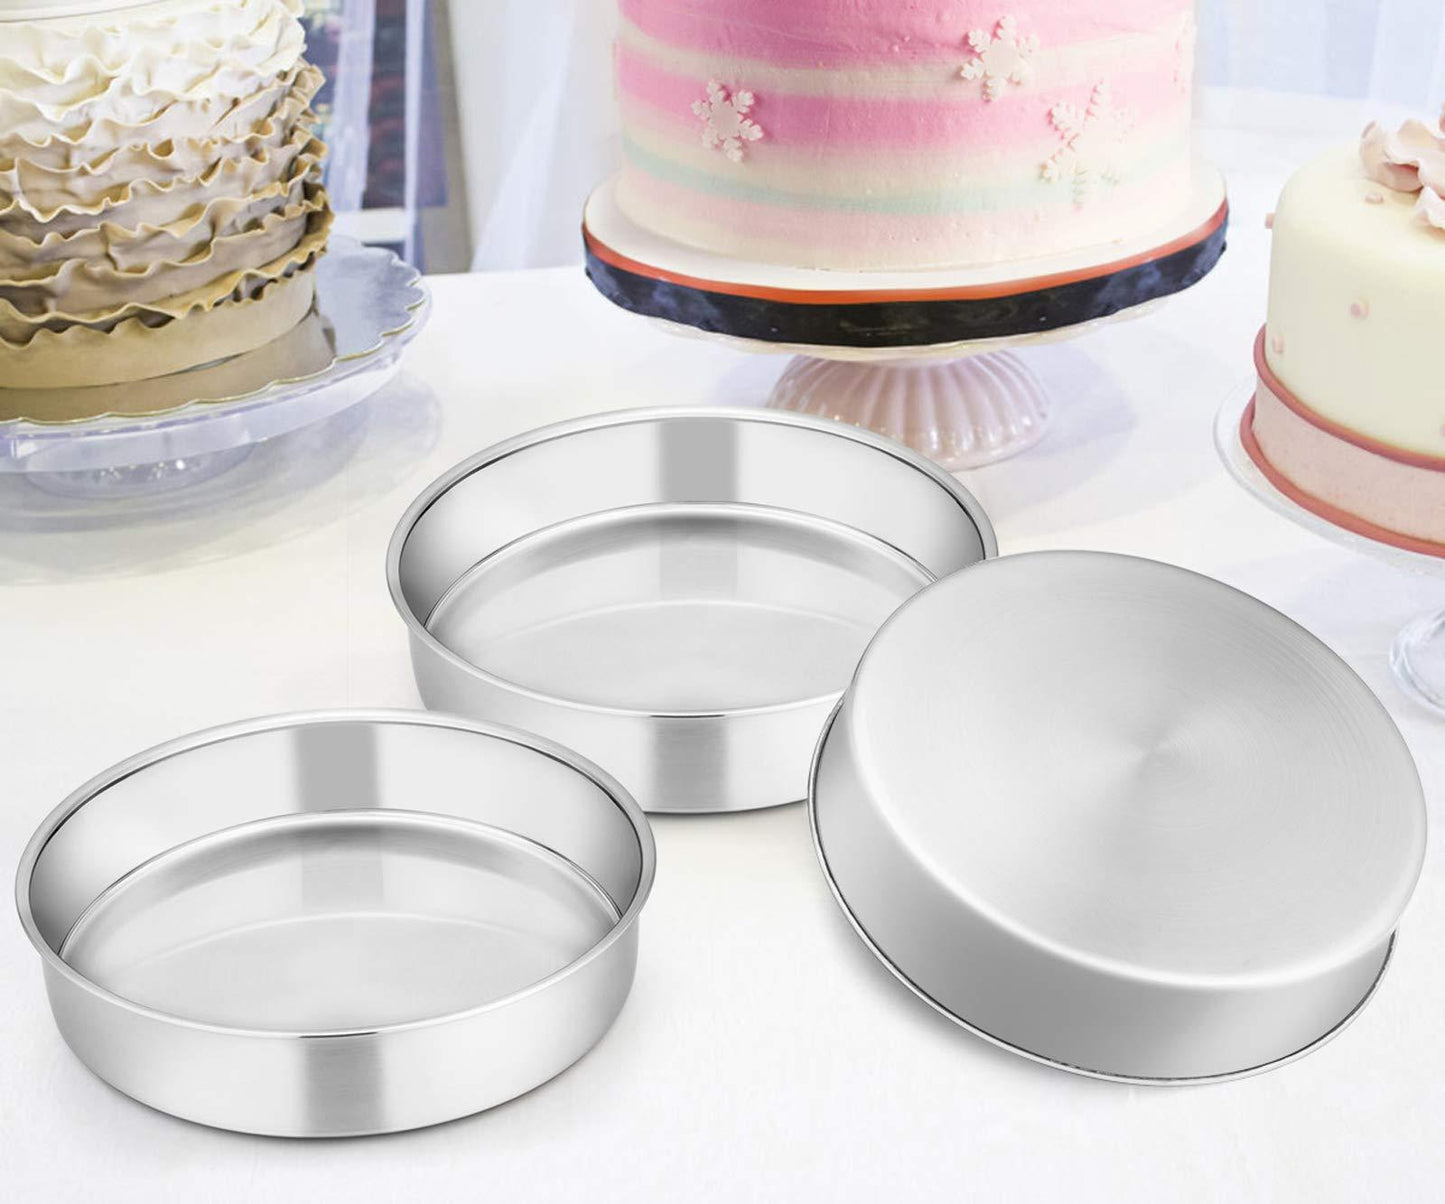 E-far 8 Inch Cake Pan Set of 3, Stainless Steel Round Layer Cake Baking Pans, Non-Toxic & Healthy, Mirror Finish & Dishwasher Safe - CookCave